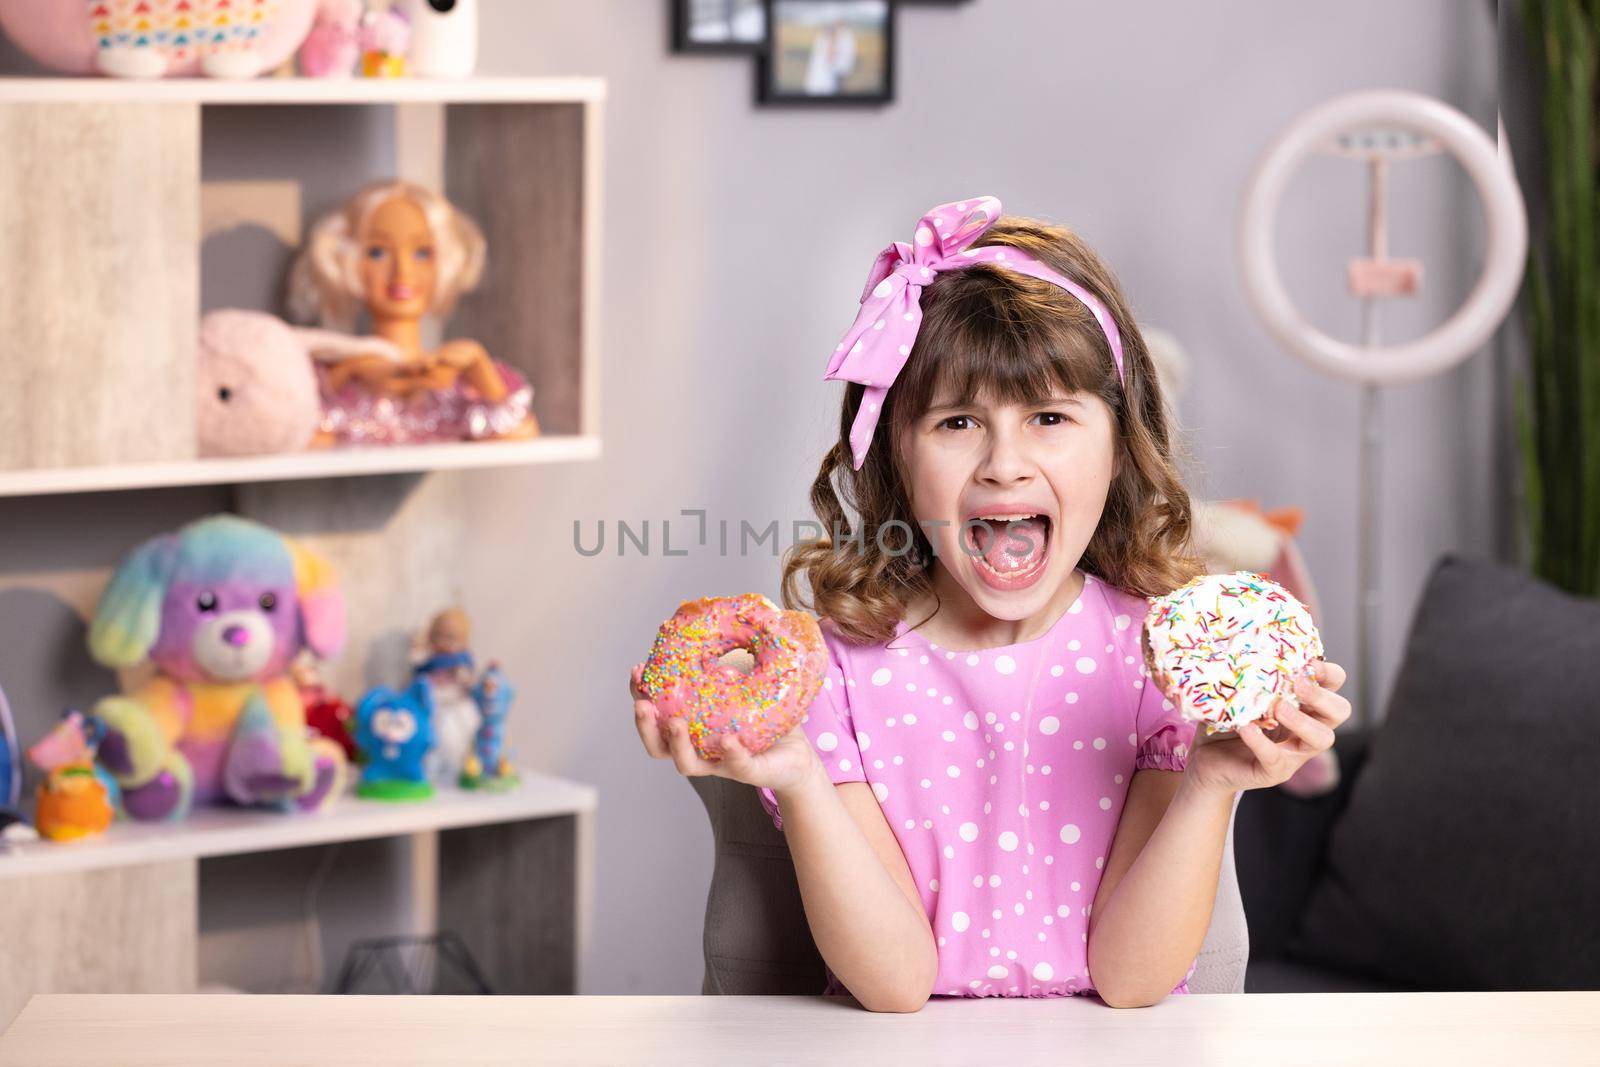 Cute adolescent school girl plays with sweet donuts doing happy fun face expressions on background. Little girl in pink dress holding two donuts in hands by the face. Funny concept with sweets.